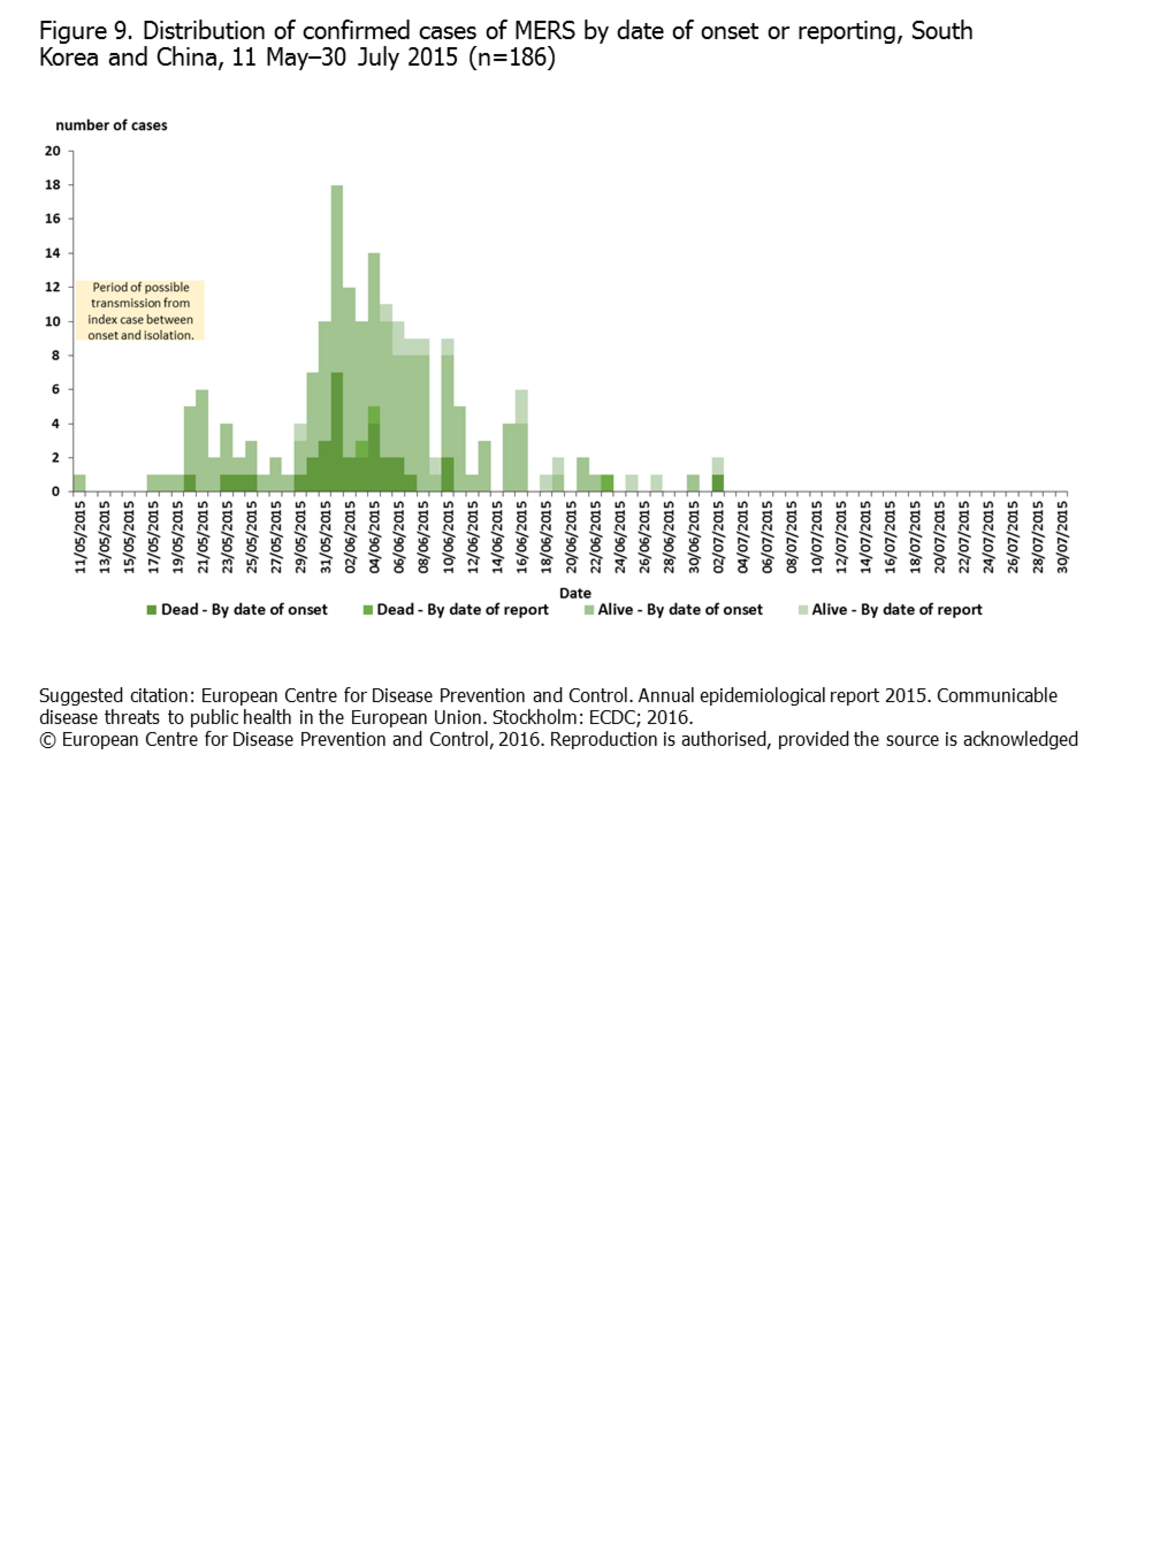 Distribution of confirmed cases of MERS by date of onset or reporting, South Korea and China, 11 May–30 July 2015 (n=186)